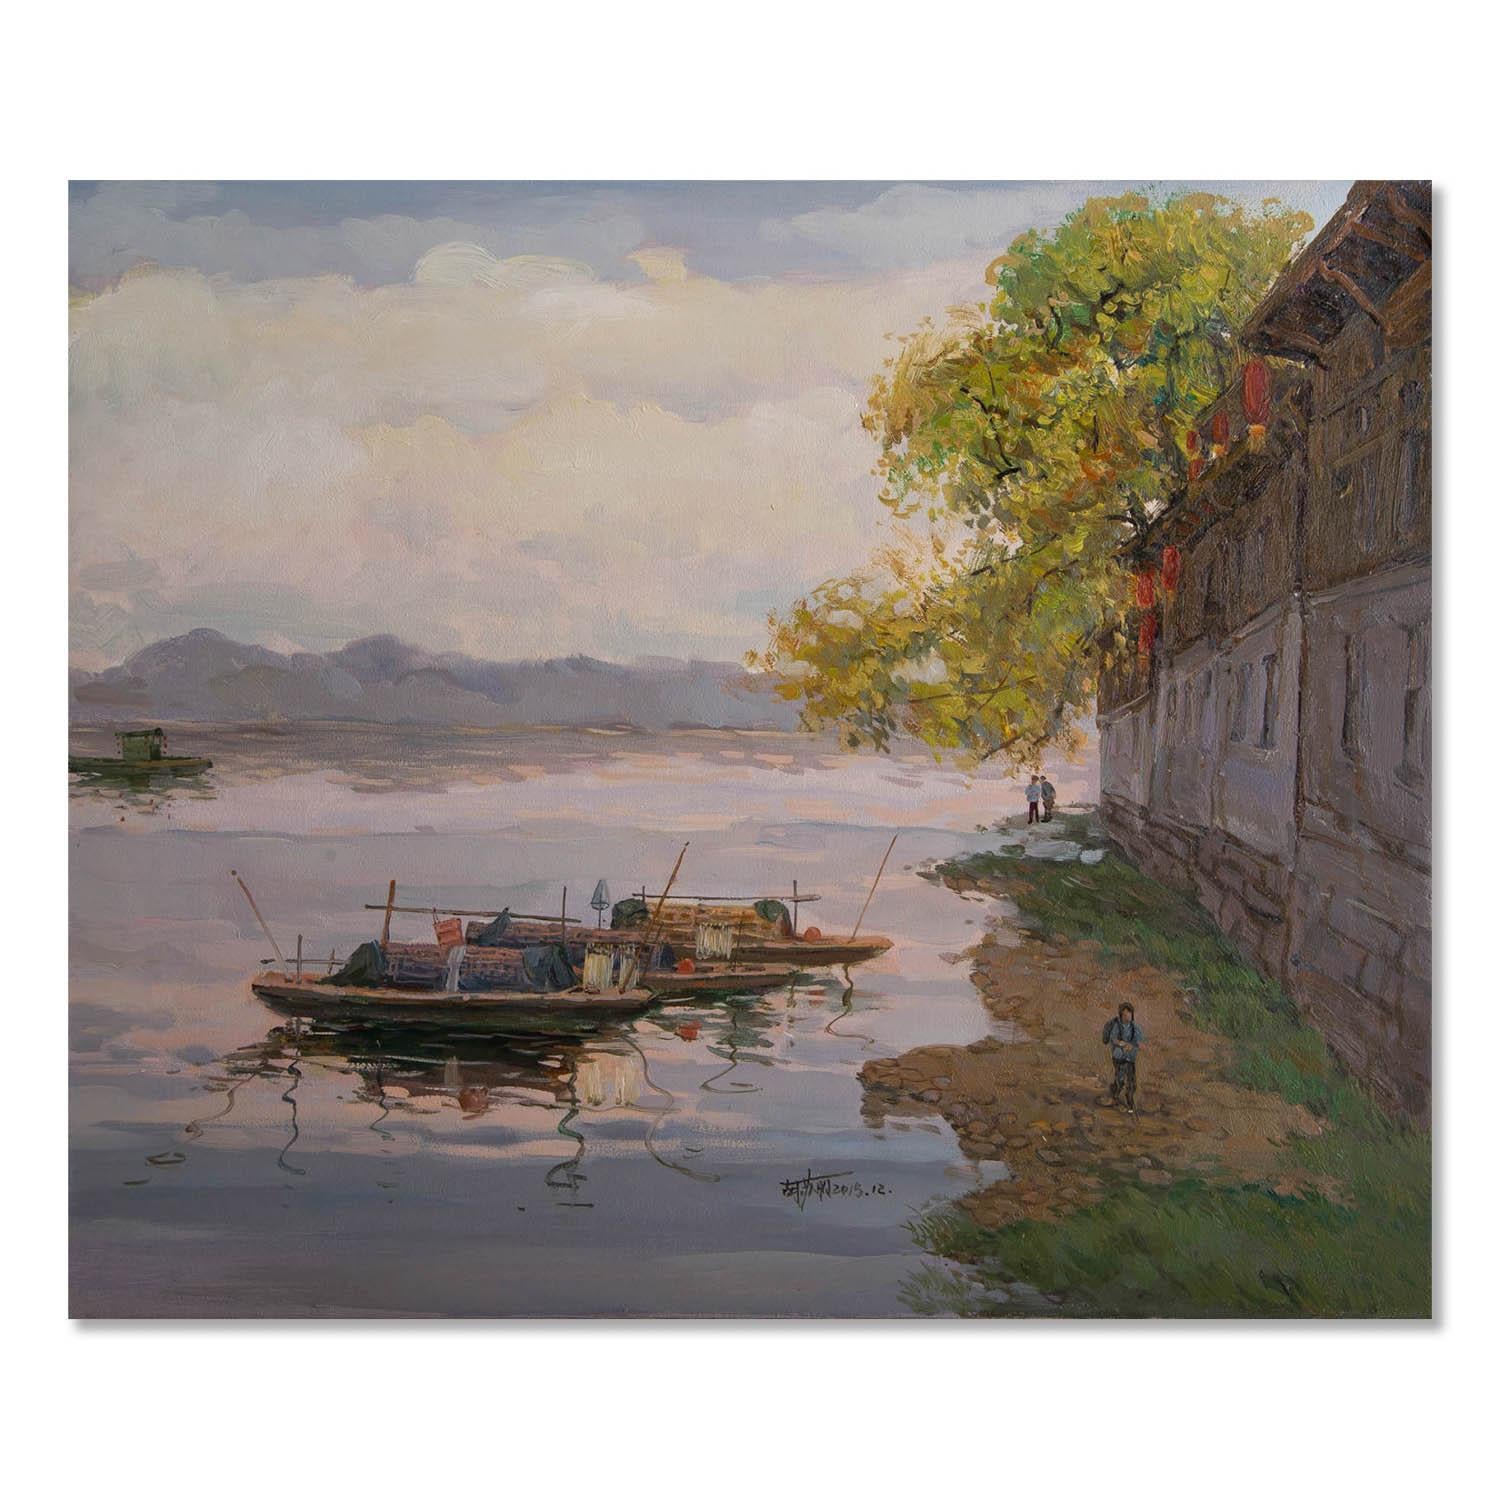  Title: Boat
 Medium: Oil on canvas
 Size: 19.5 x 23 inches
 Frame: Framing options available!
 Condition: The painting appears to be in excellent condition.
 
 Year: 2015
 Artist: Suli Hu
 Signature: Signed
 Signature Location: Lower right
